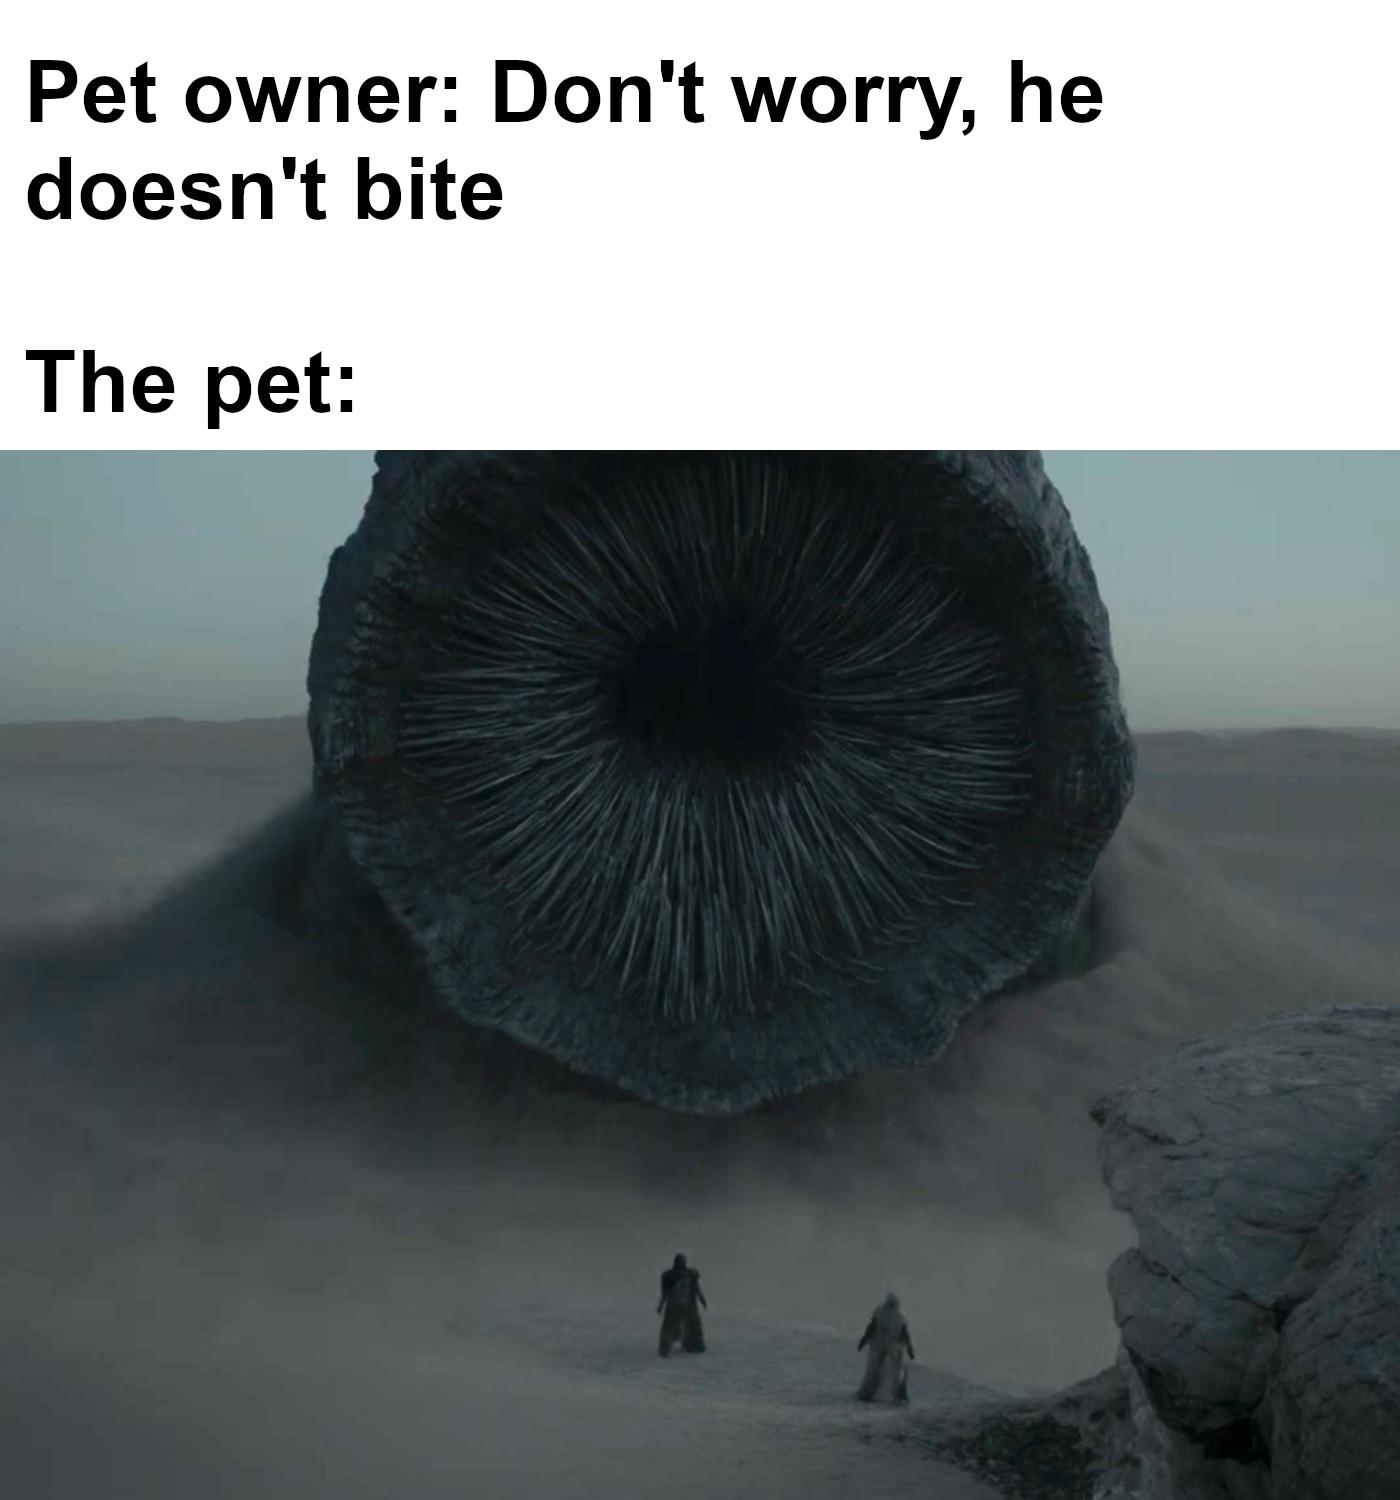 sky - Pet owner Don't worry, he doesn't bite The pet